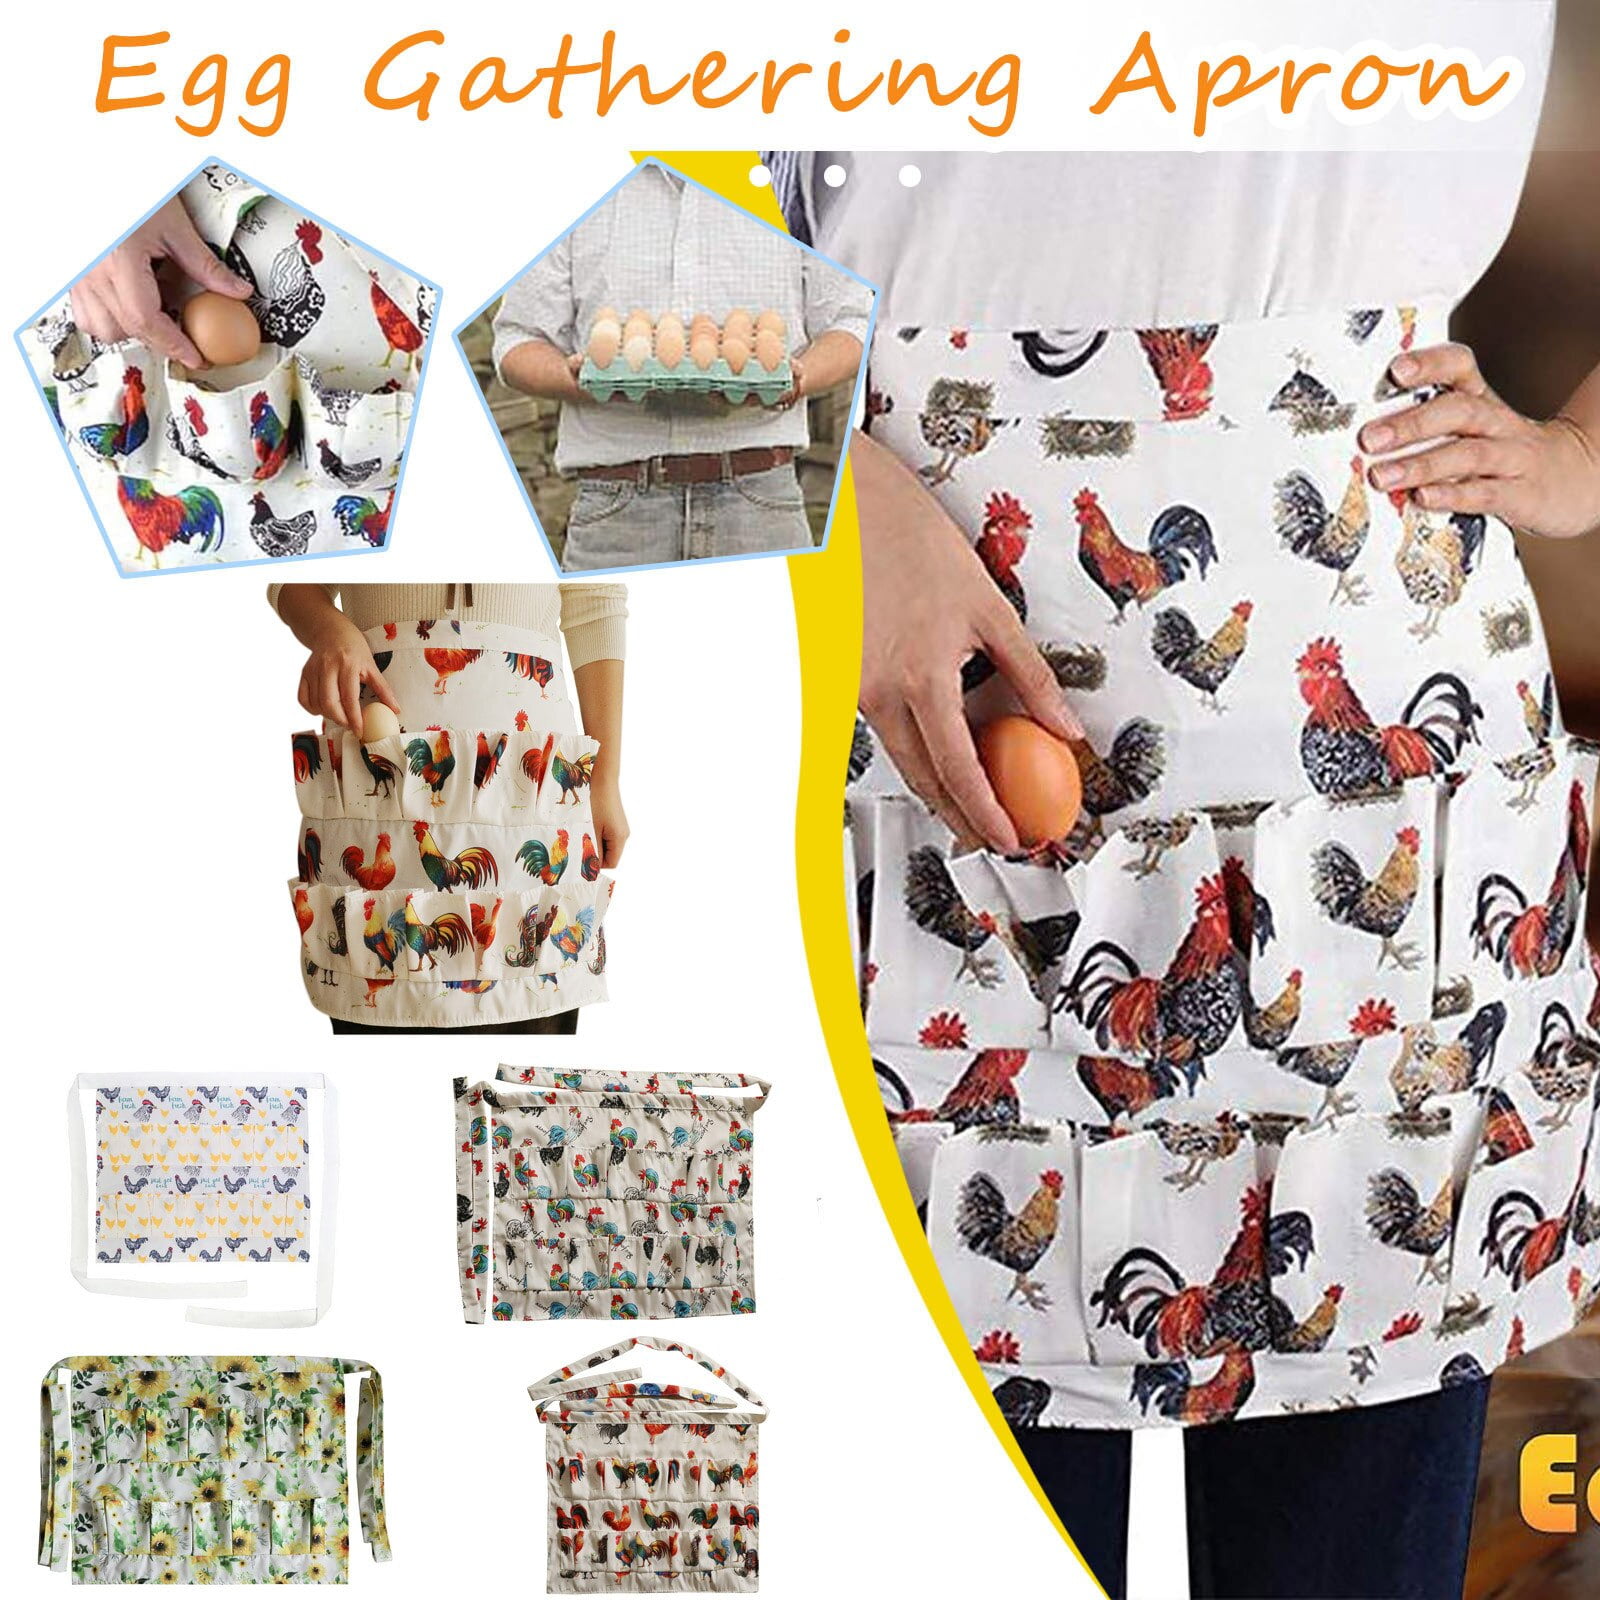 DBC Egg Collecting Apron For Chicken Farmers Pockets, S M L Sizes, Carry  Goose/Duck Eggs Farm Work Apron From Besgohomedecor, $3.79